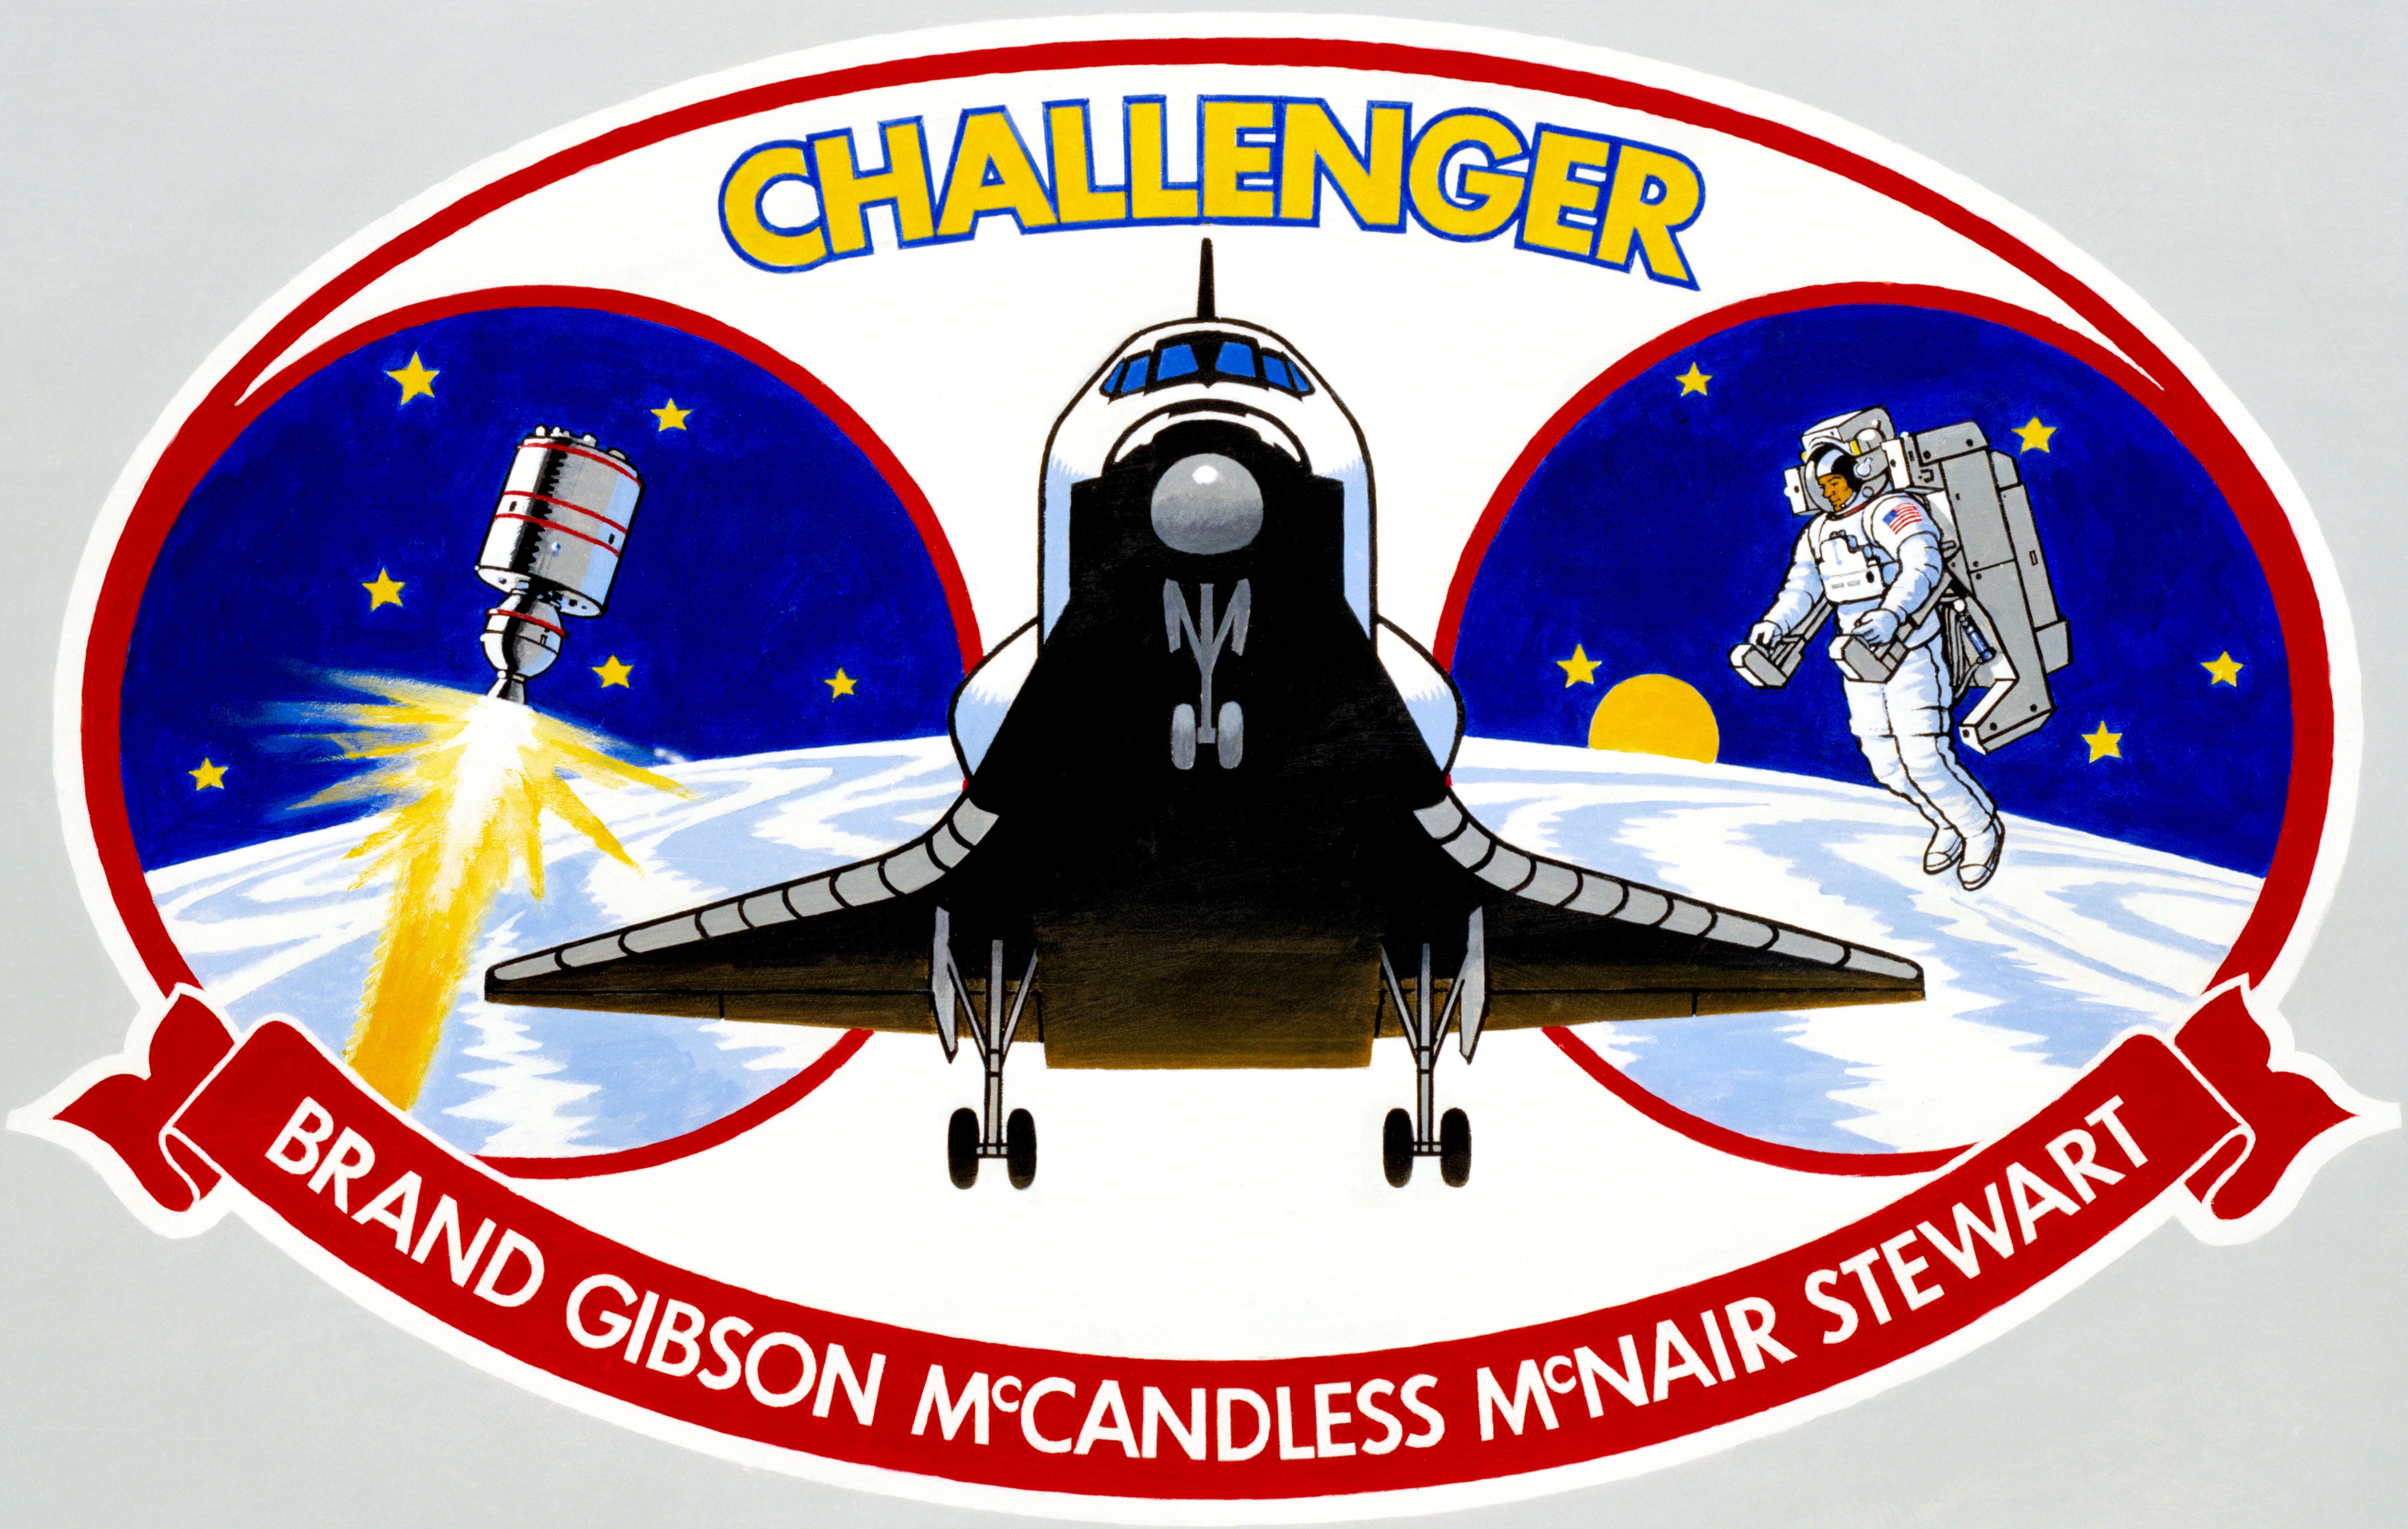 The STS-41B crew patch